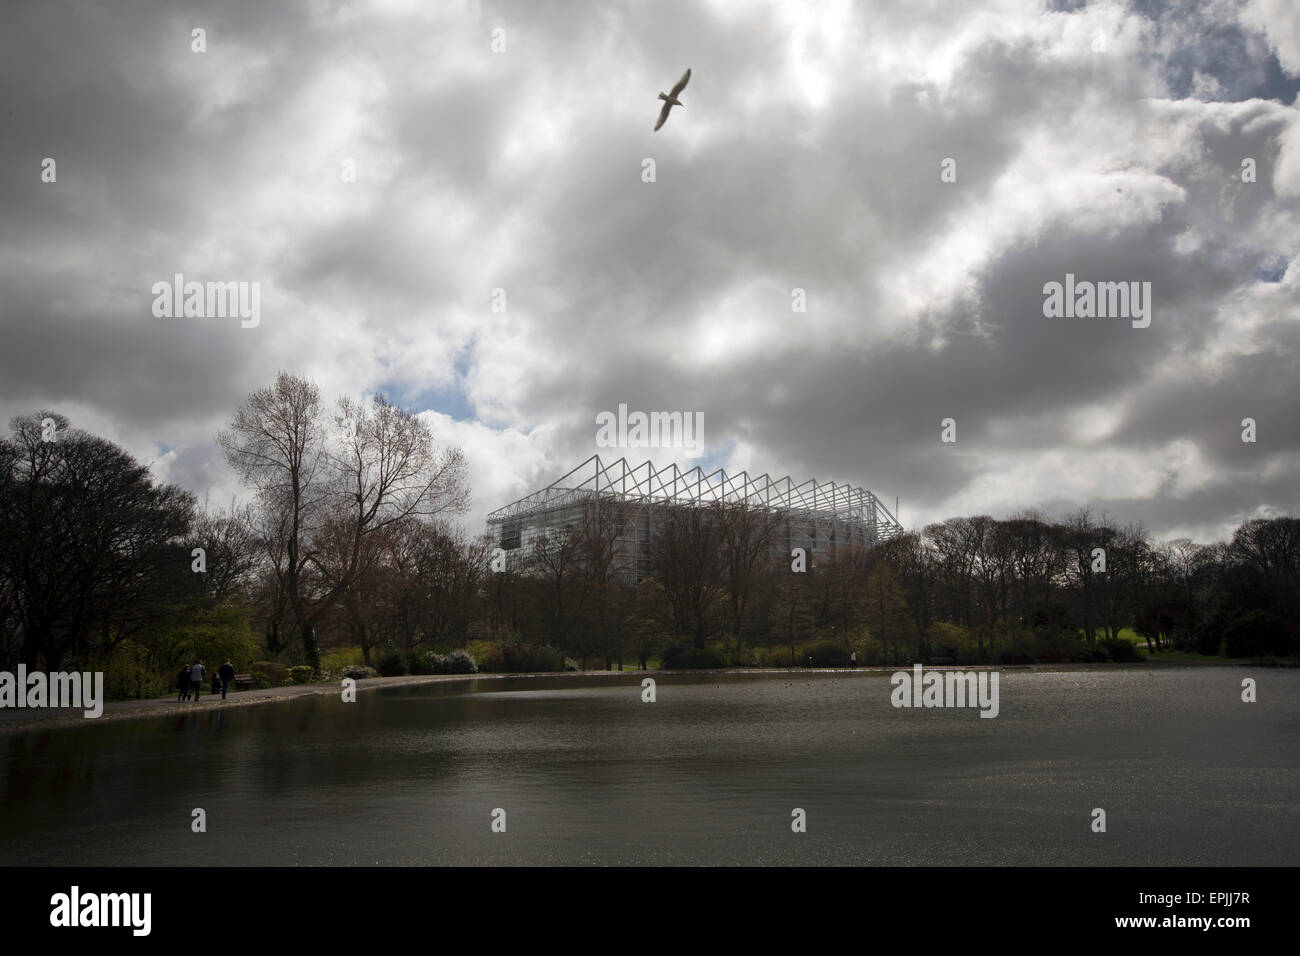 A seagull flying over a lake in Leazes Park, situated behind the Leazes Stand of the stadium before Newcastle United host Tottenham Hotspurs in an English Premier League match at St. James' Park. The match was boycotted by a section of the home support critical of the role of owner Mike Ashley and sponsorship by a payday loan company. The match was won by Spurs by 3-1, watched by 47,427, the lowest league gate of the season at the stadium. Stock Photo